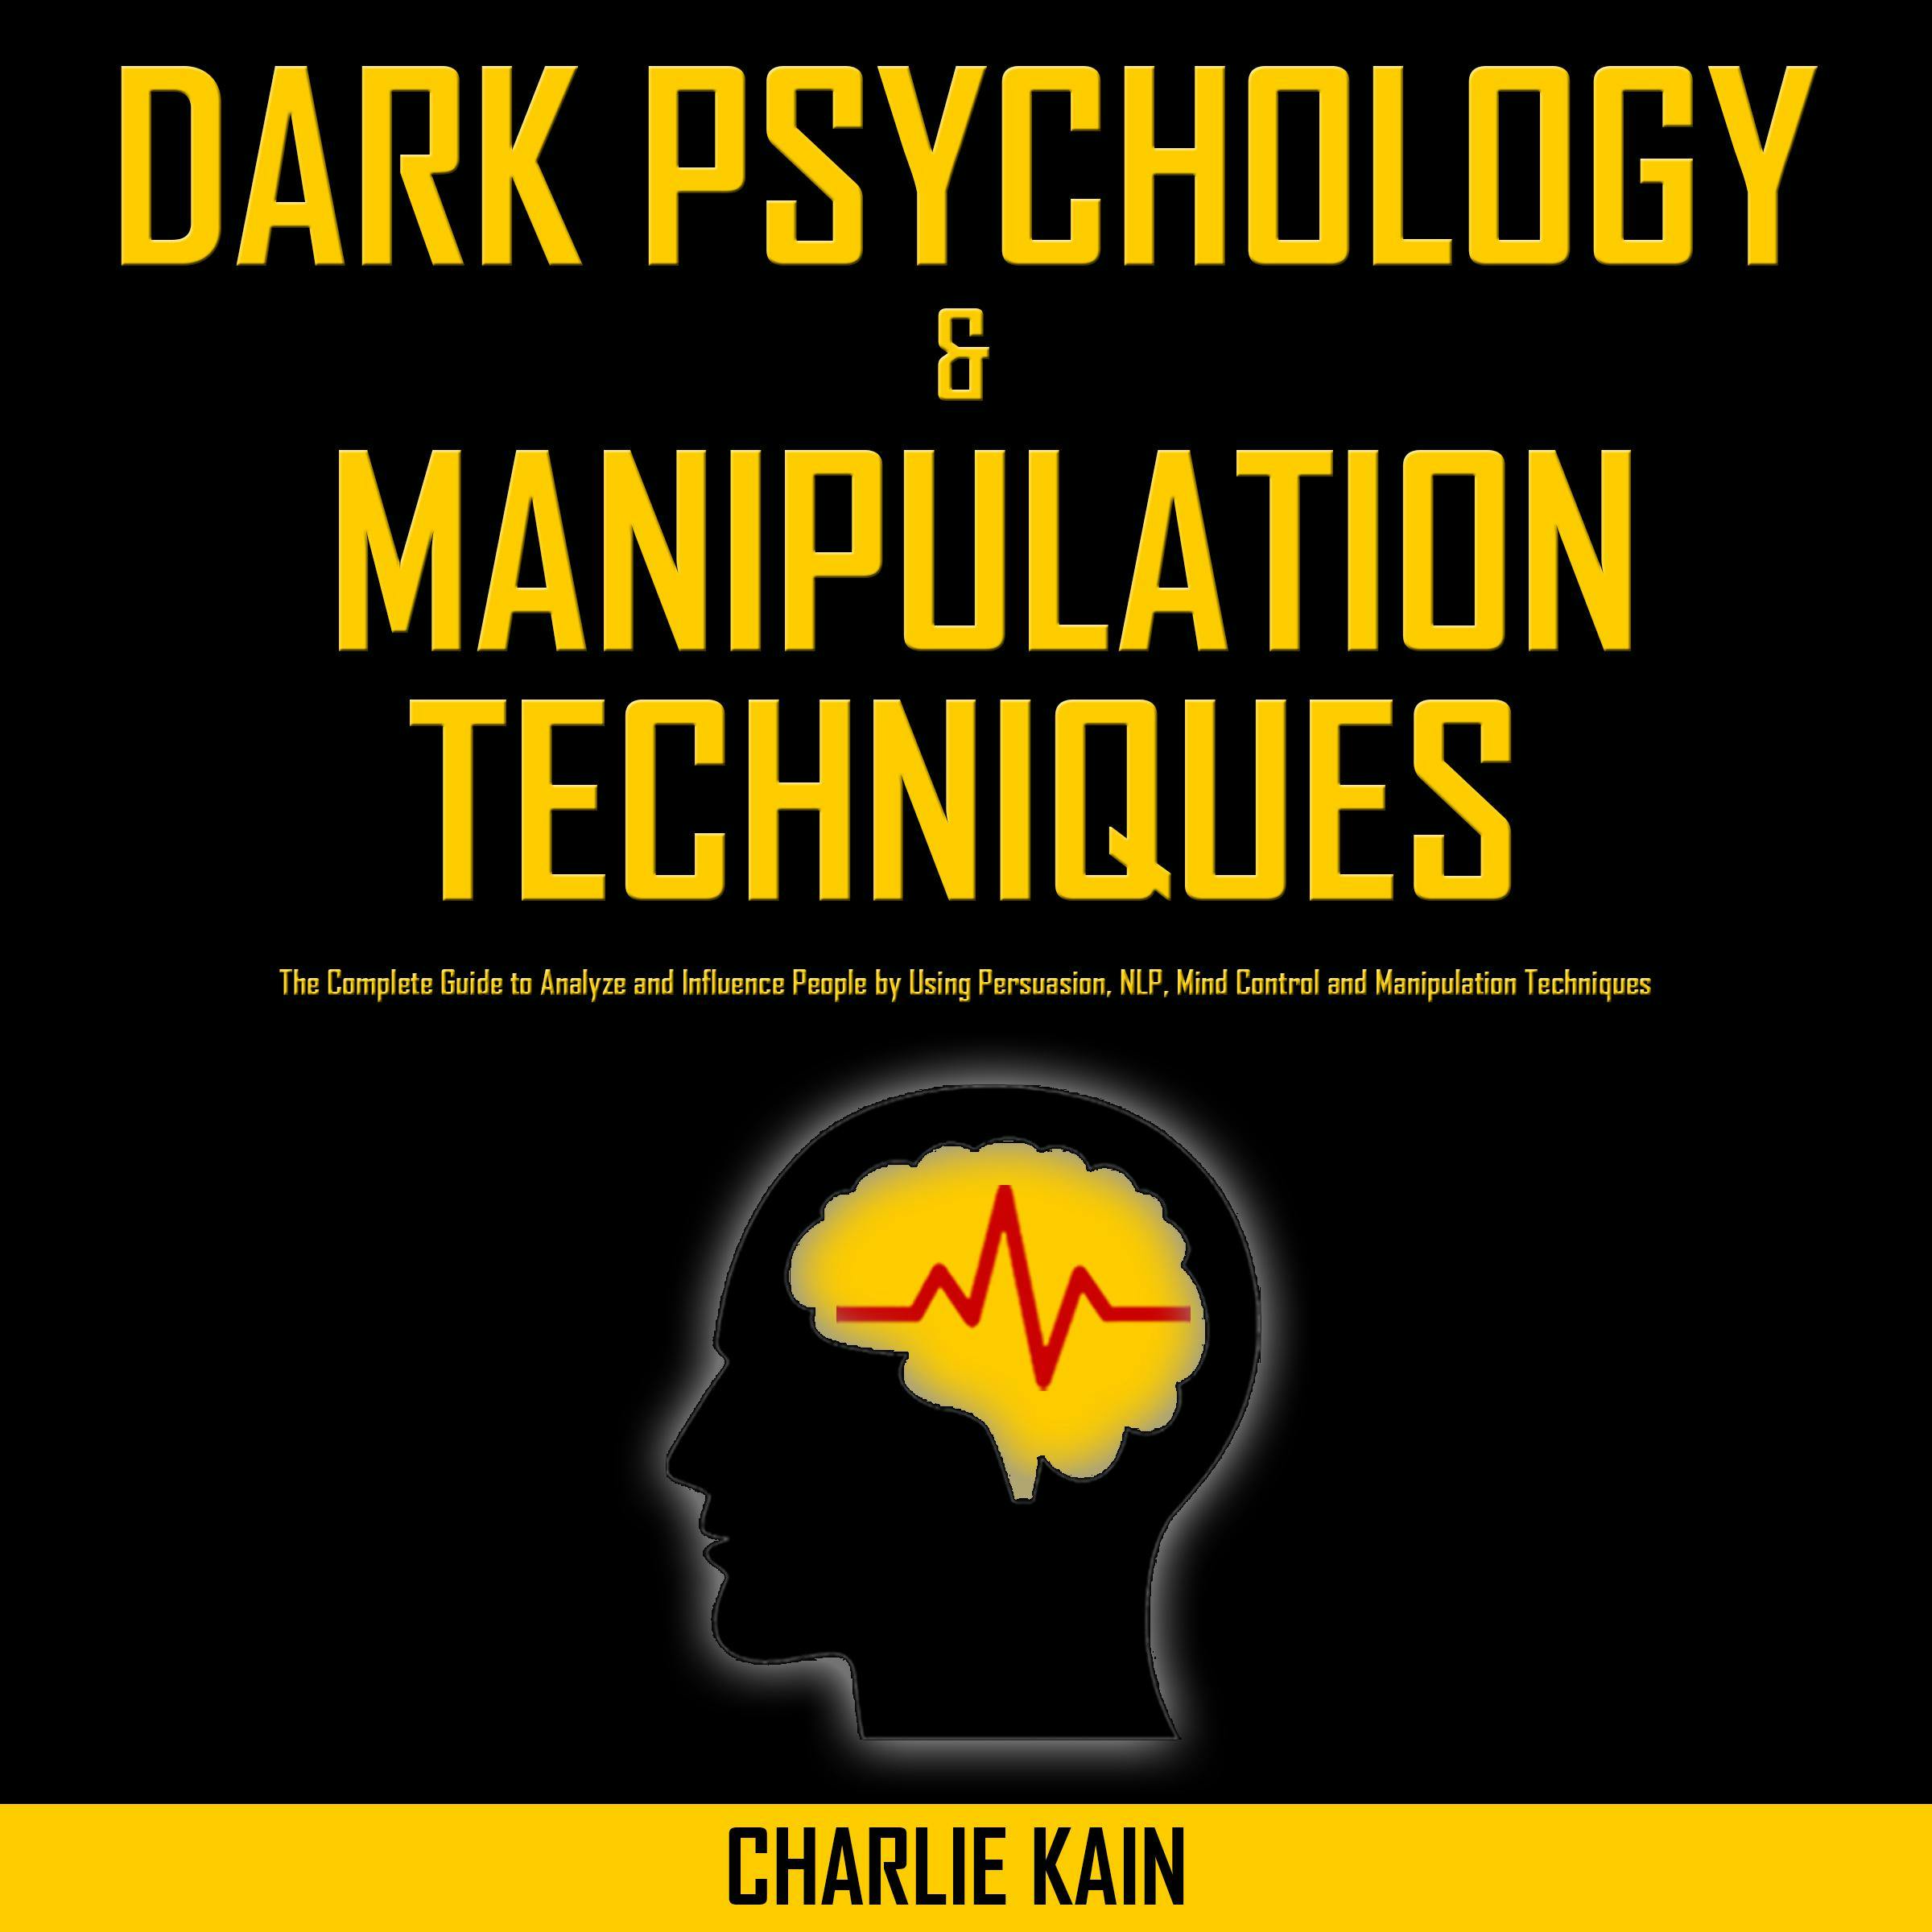 Dark Psychology & Manipulation Techniques: The Complete Guide to Analyze and Influence People by Using Persuasion, NLP, Mind Control and Manipulation Techniques - CHARLIE KAIN